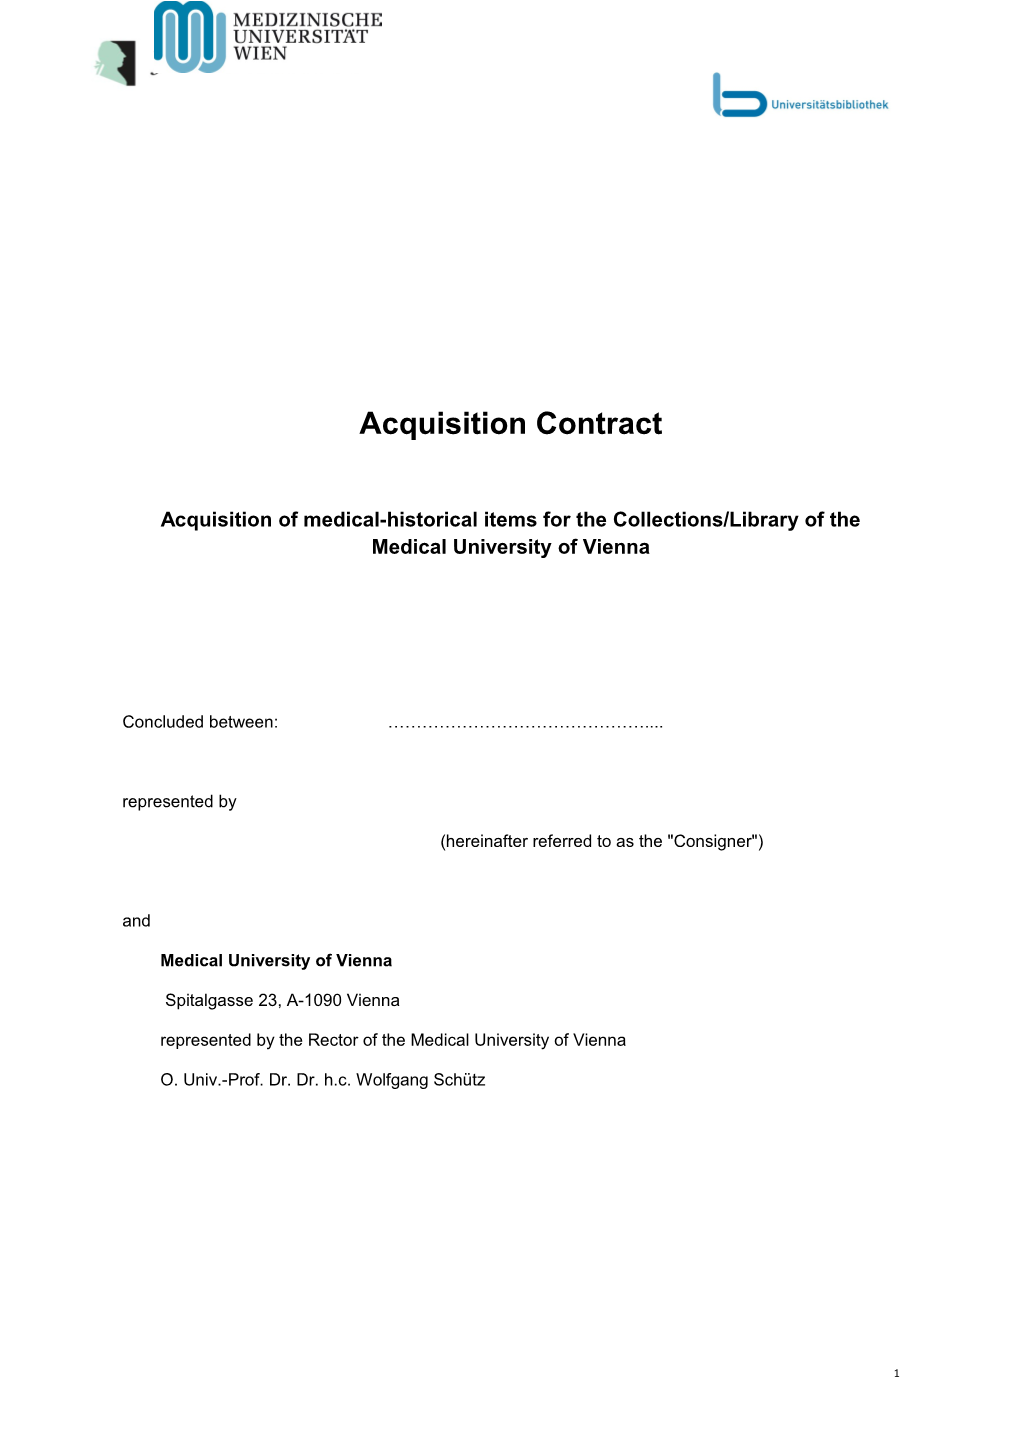 Acquisition Contract